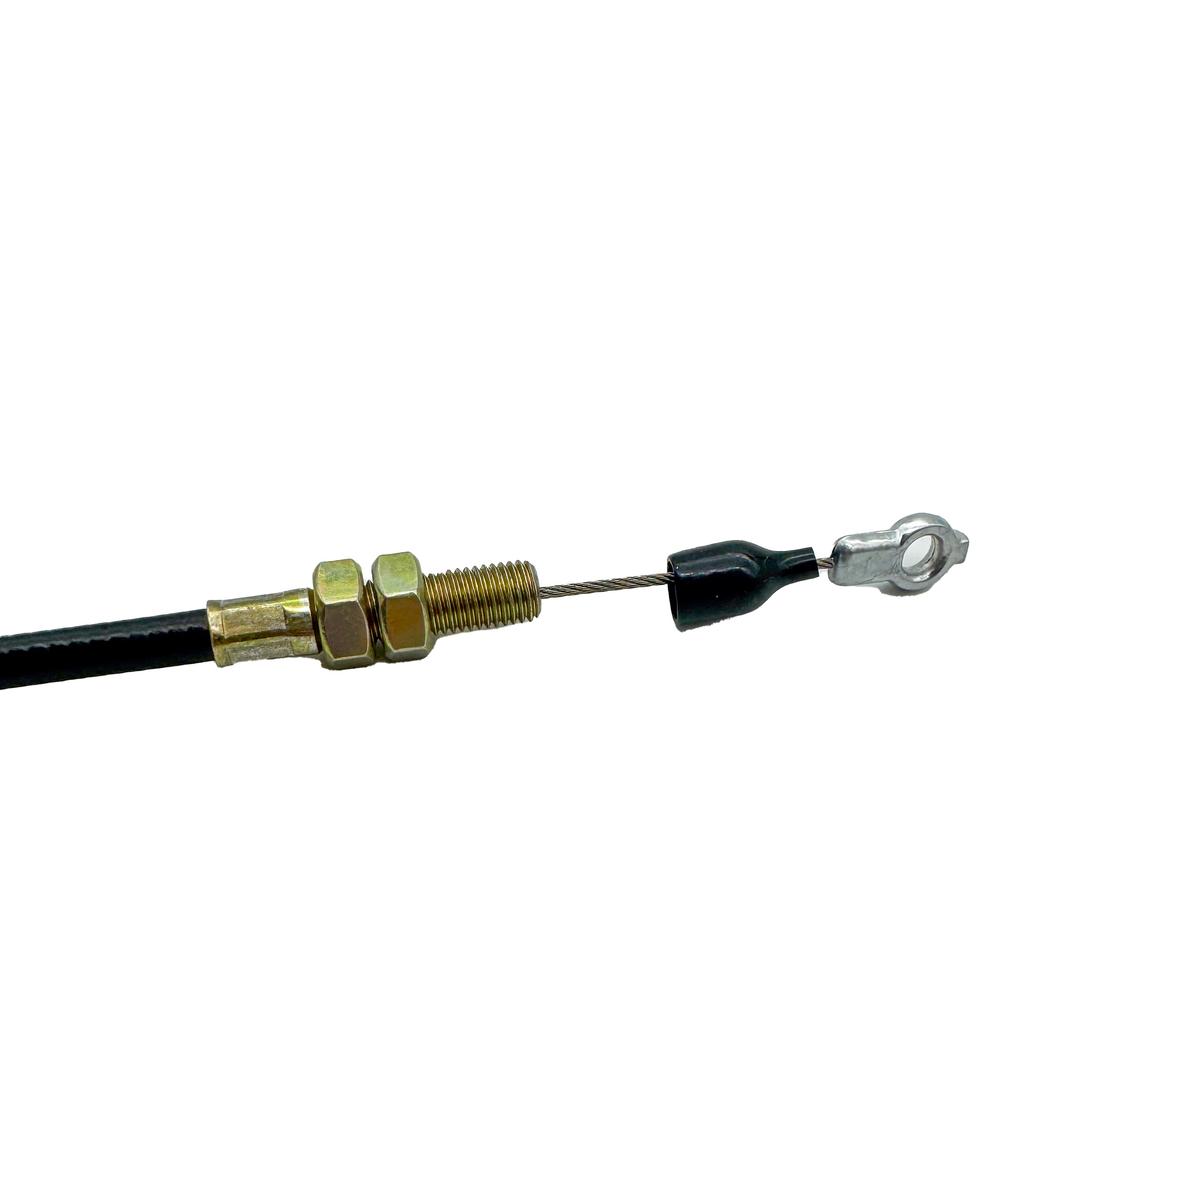 EZGO Throttle Cable (Years 1989-1993)